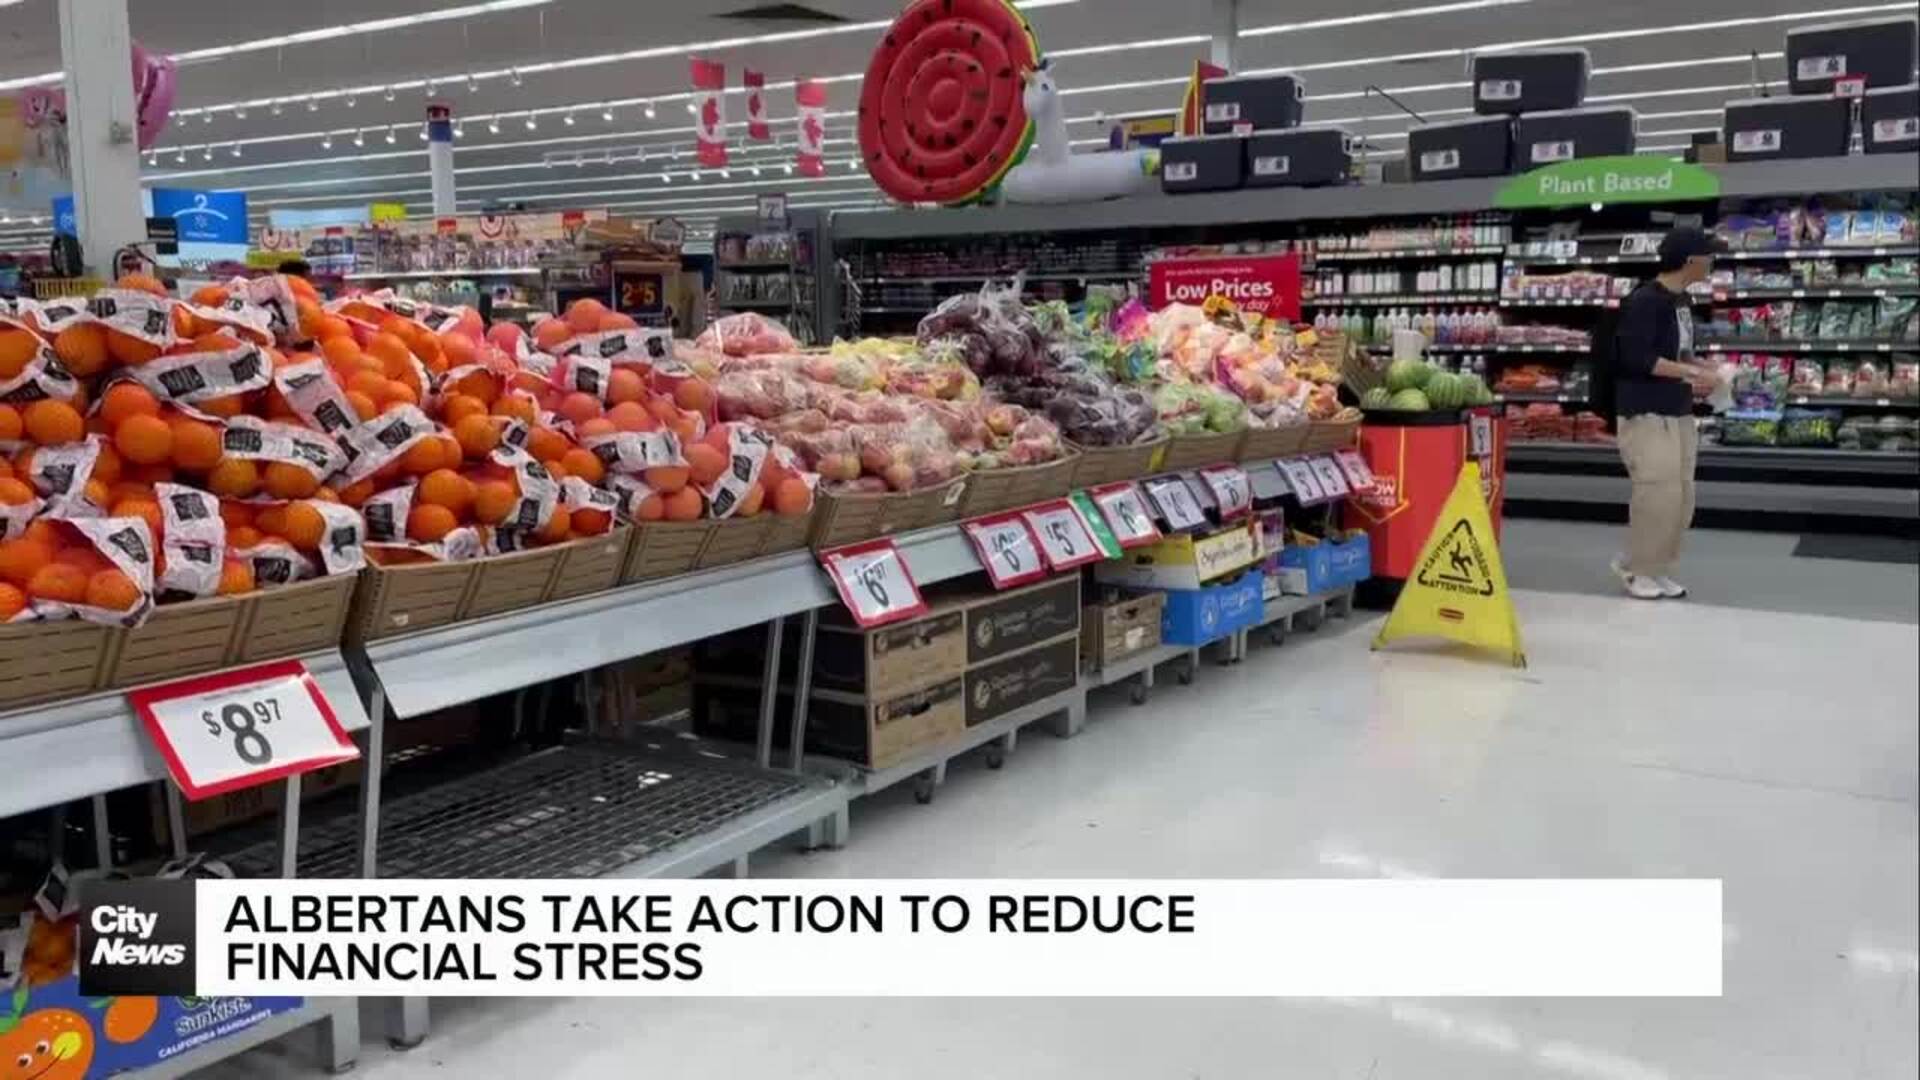 Albertans take action to reduce financial stress